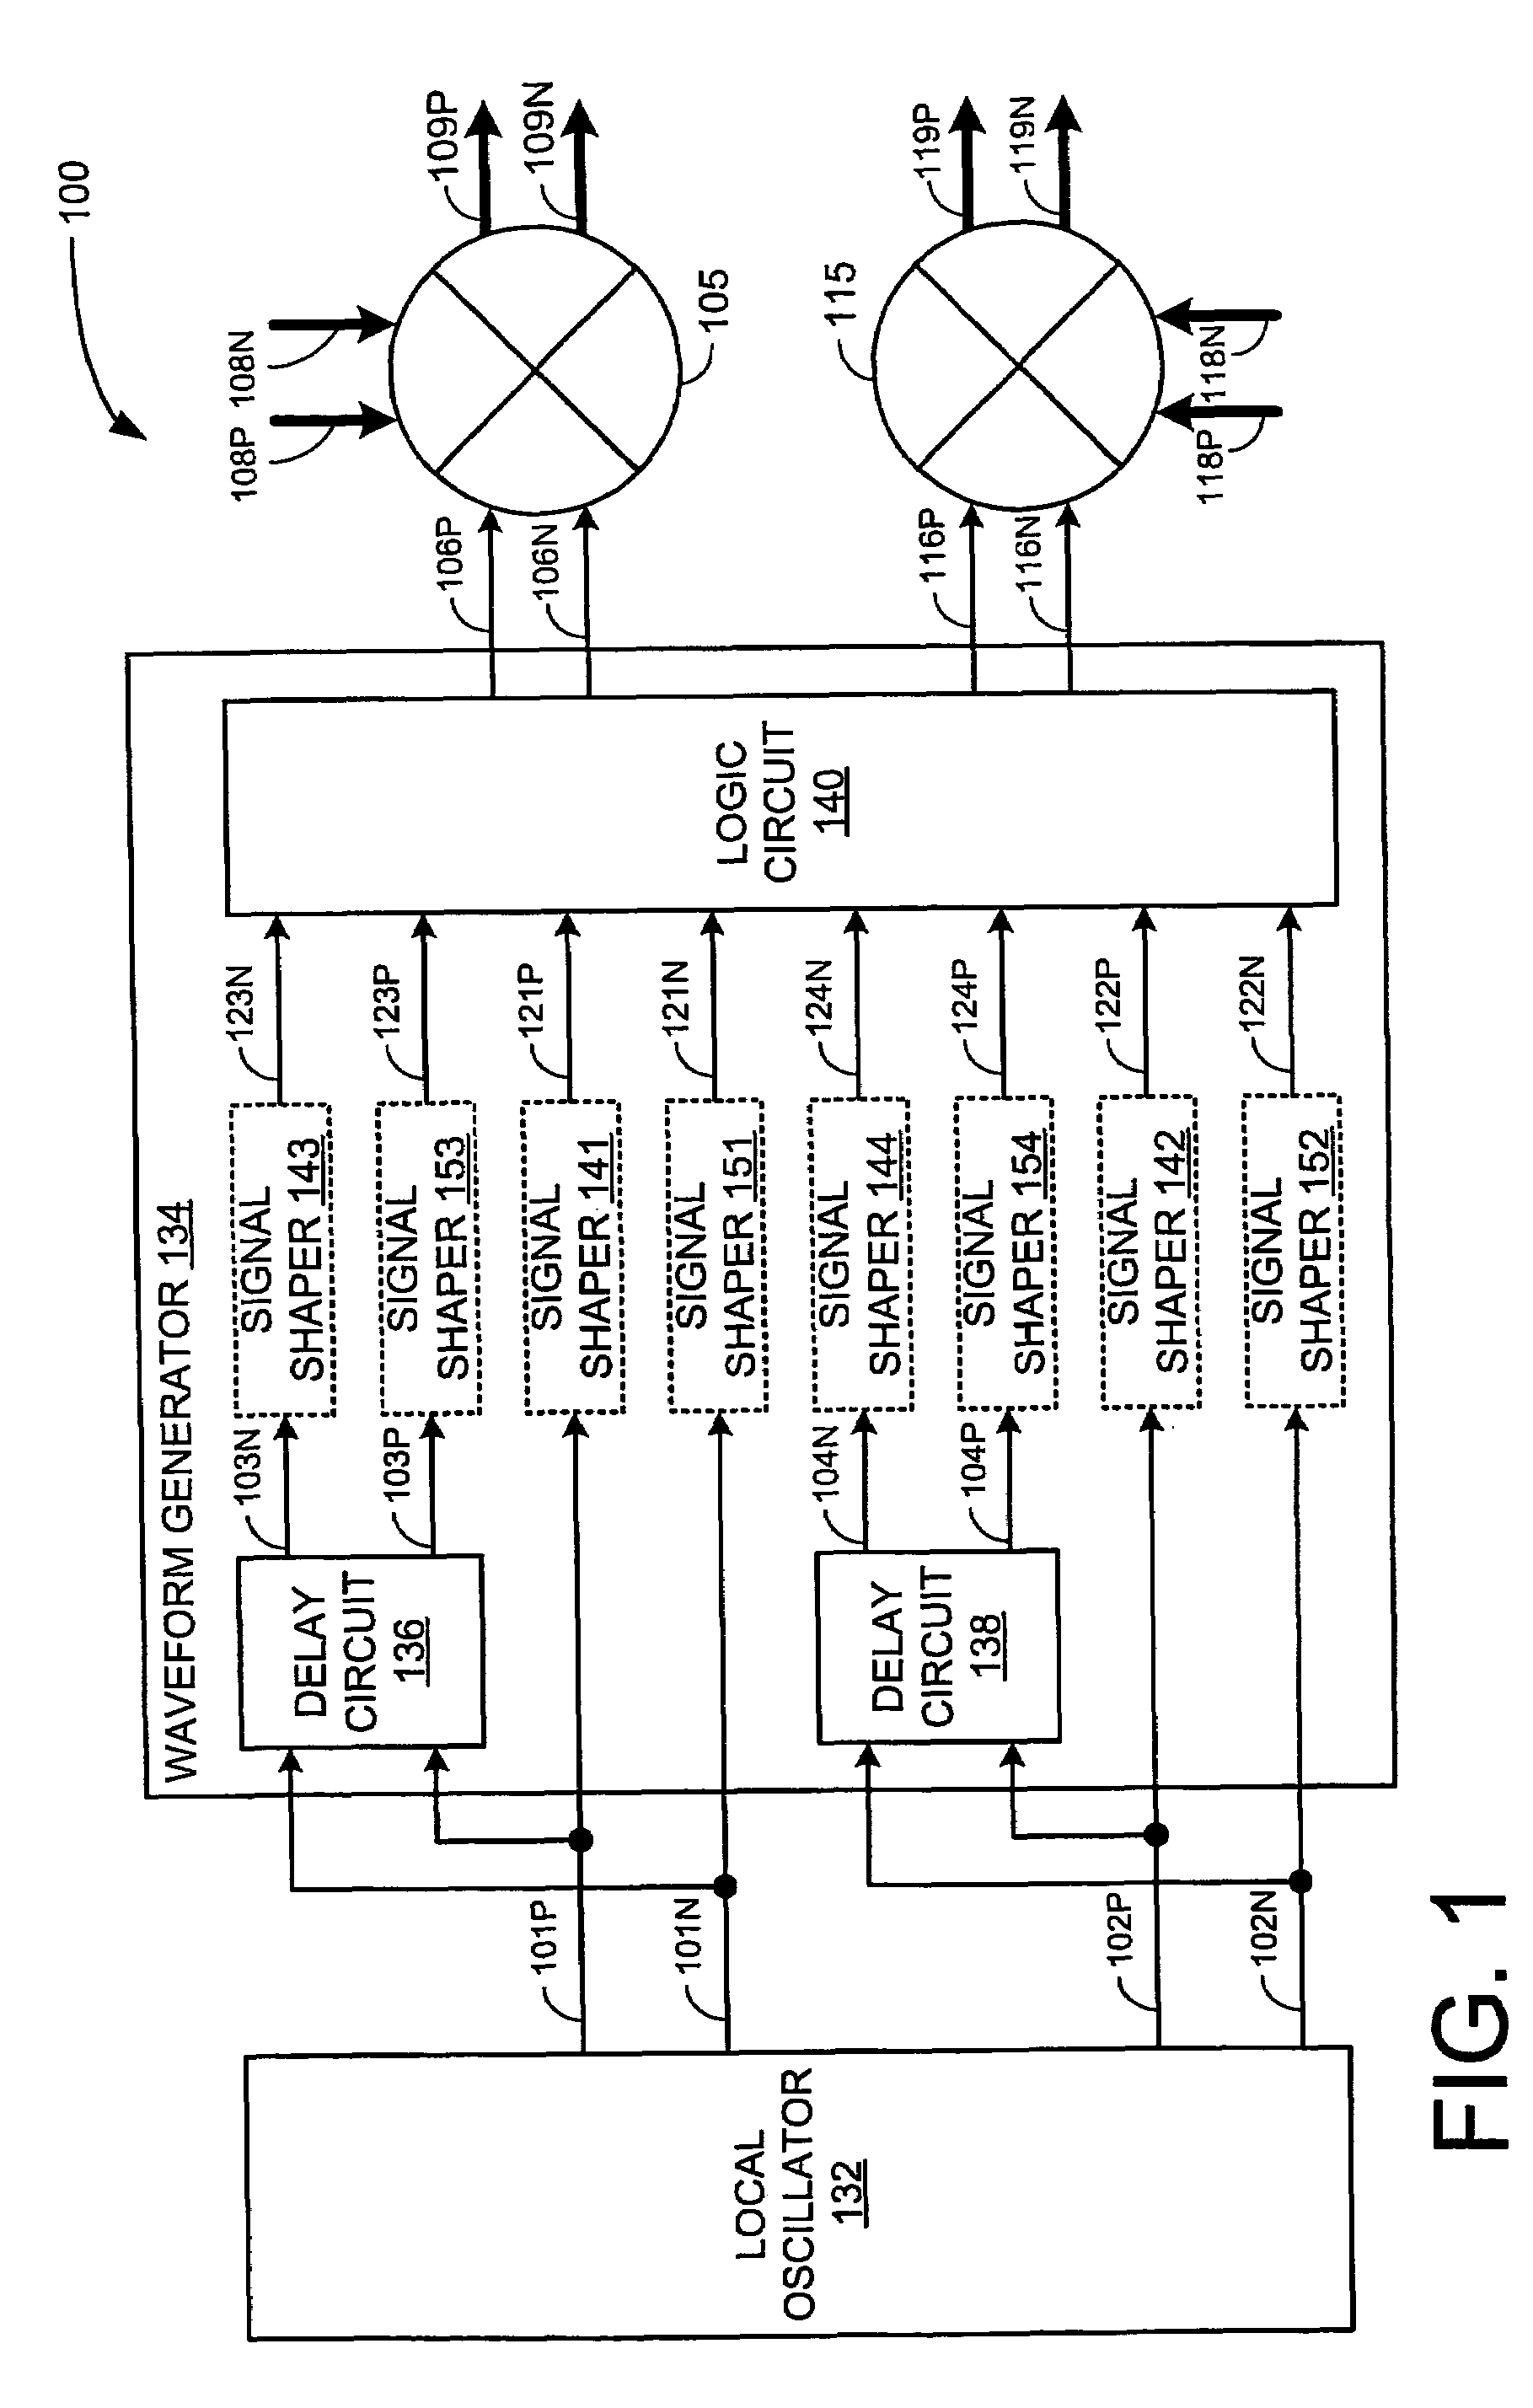 Integrated circuit and methods for third sub harmonic up conversion and down conversion of signals